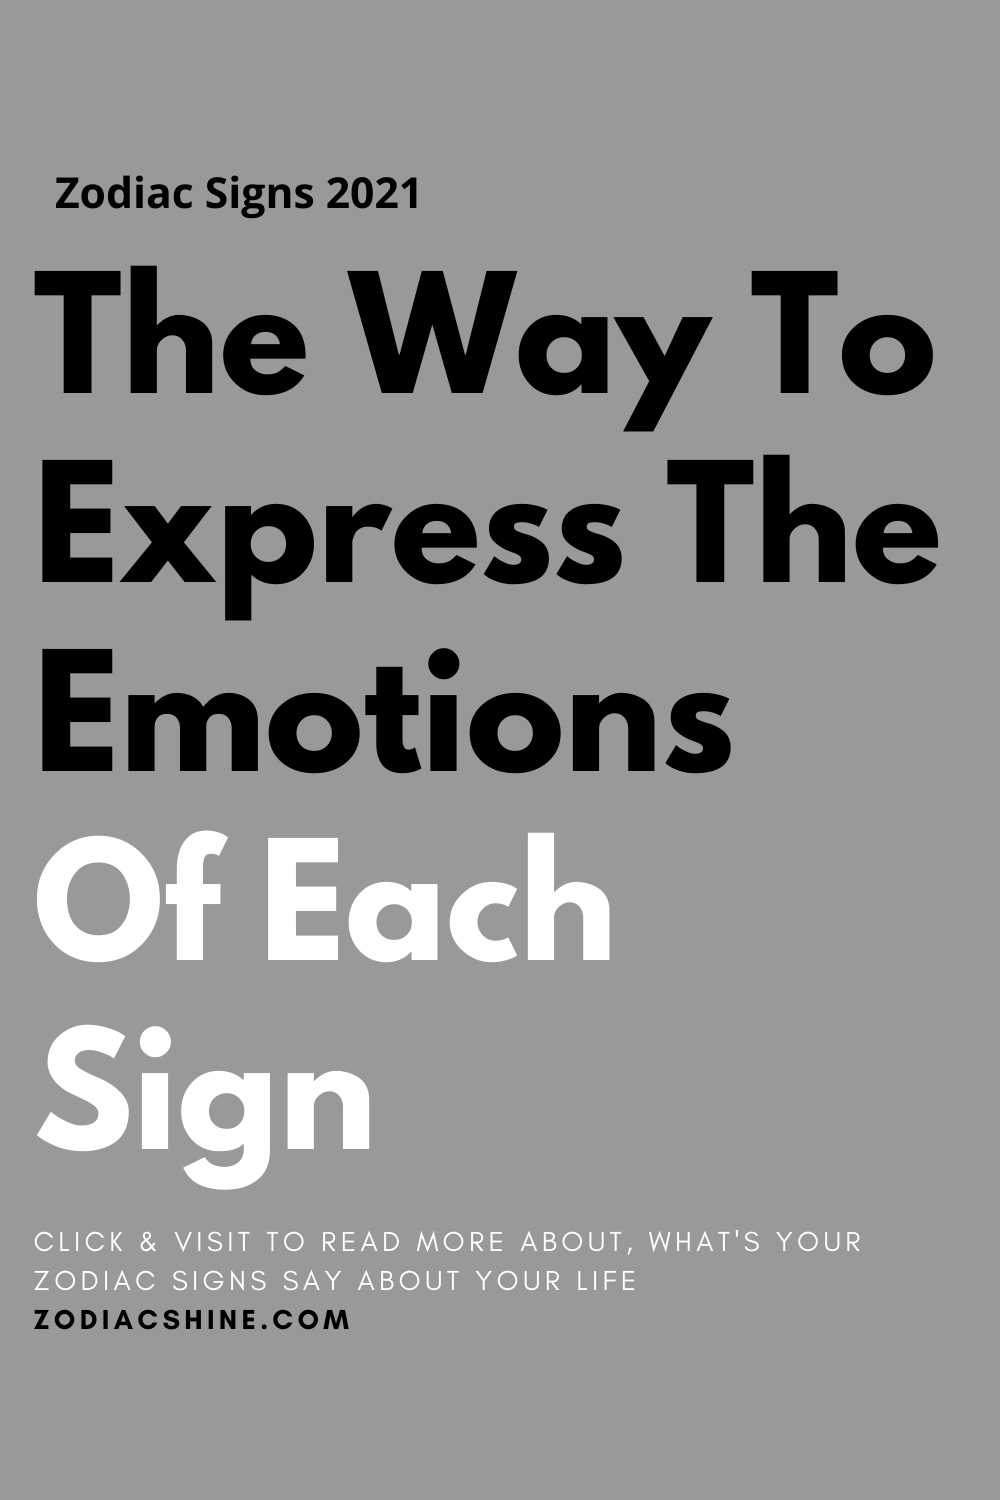 The Way To Express The Emotions Of Each Sign